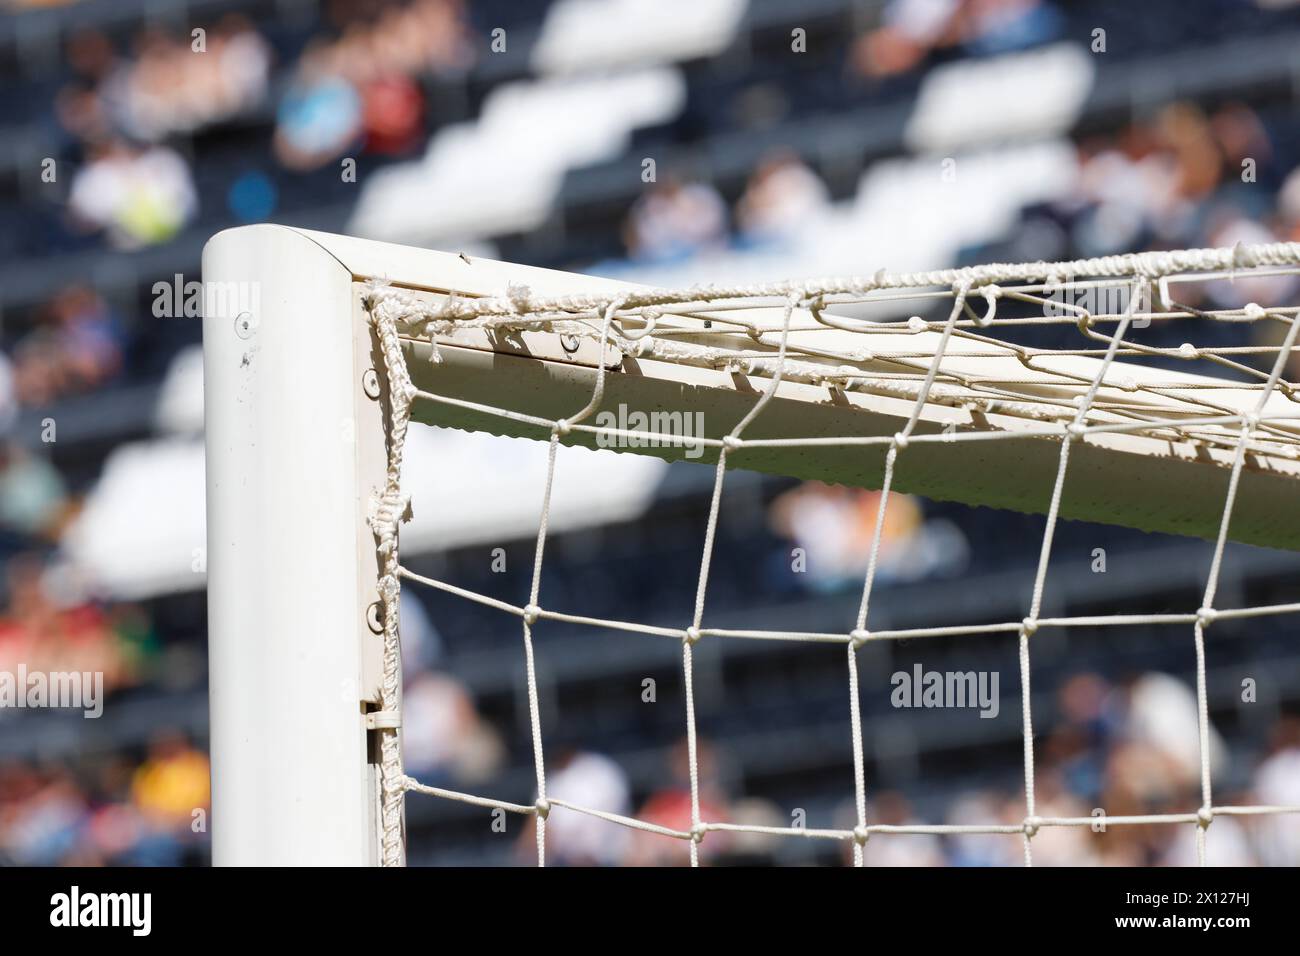 football goalpost standing tall against the backdrop of the pitch. Stock Photo